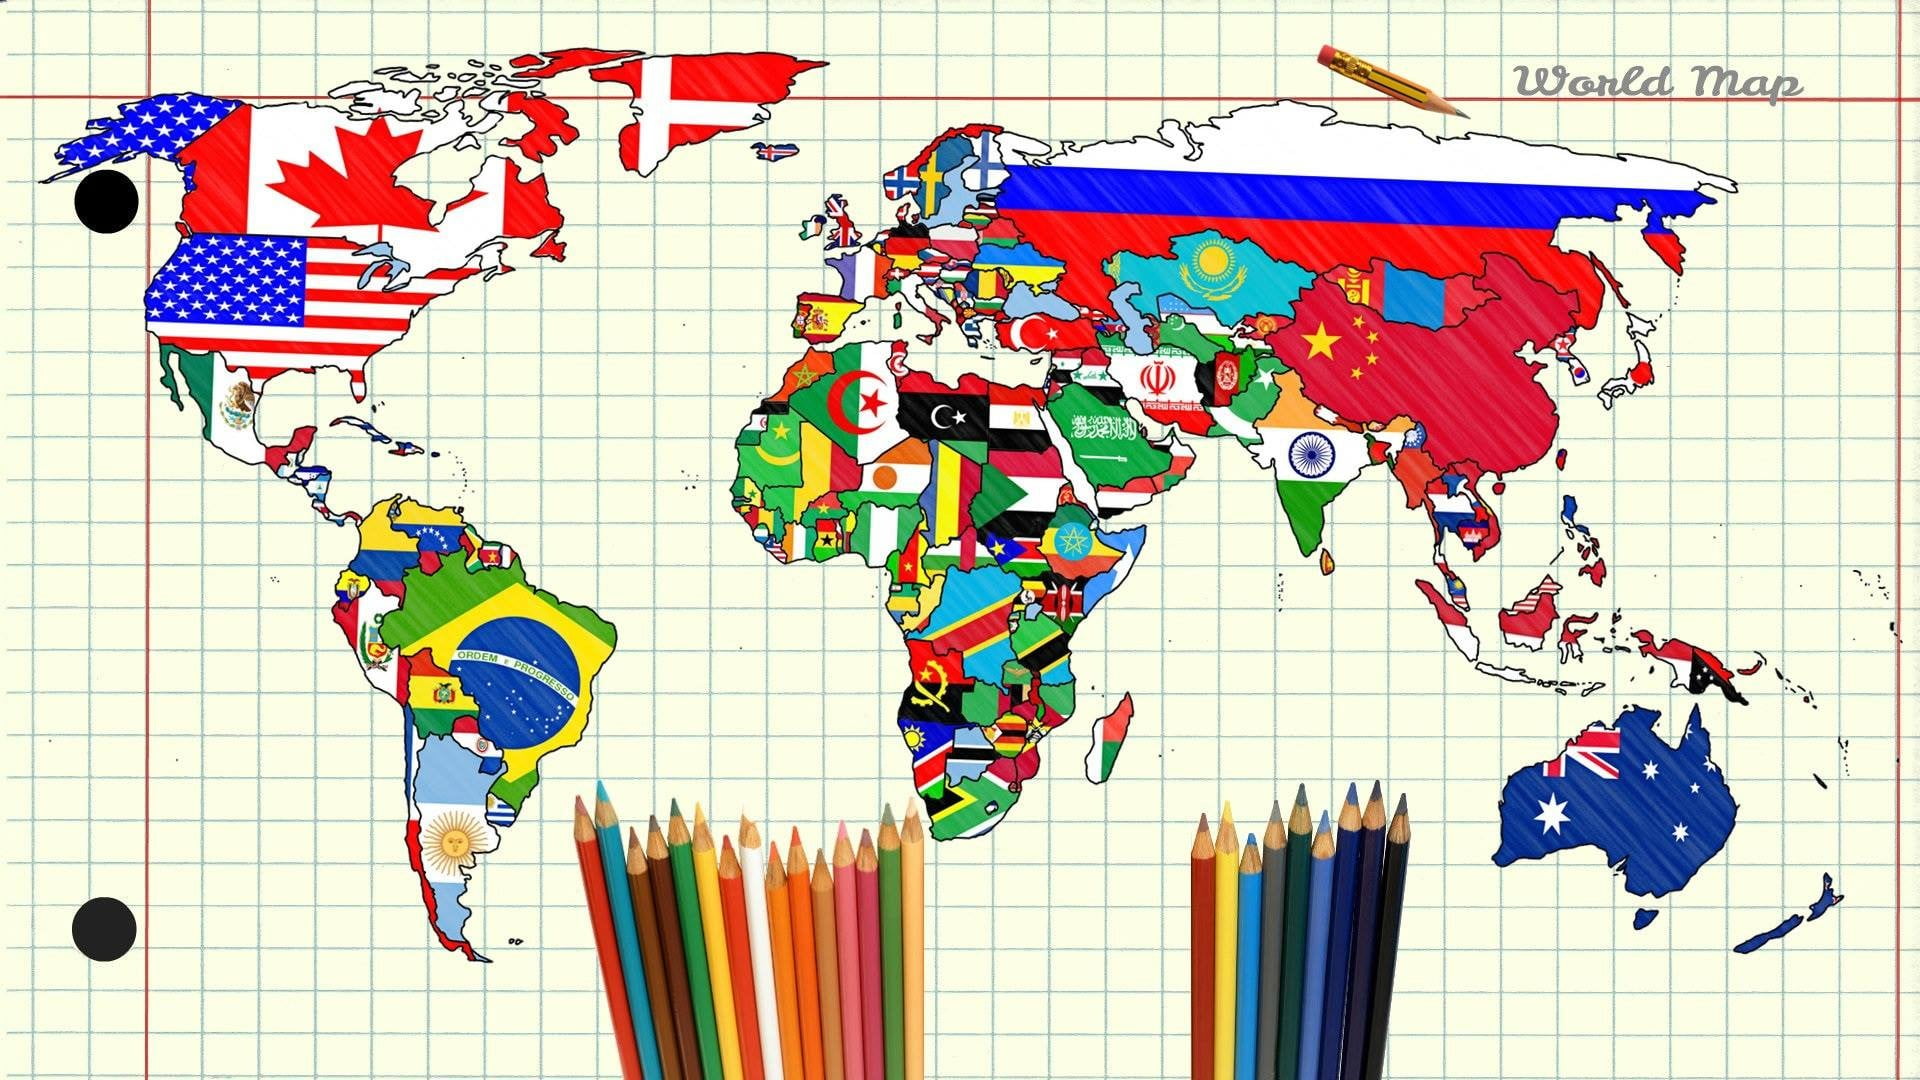 World Map Flags Countries - HD Wallpaper 